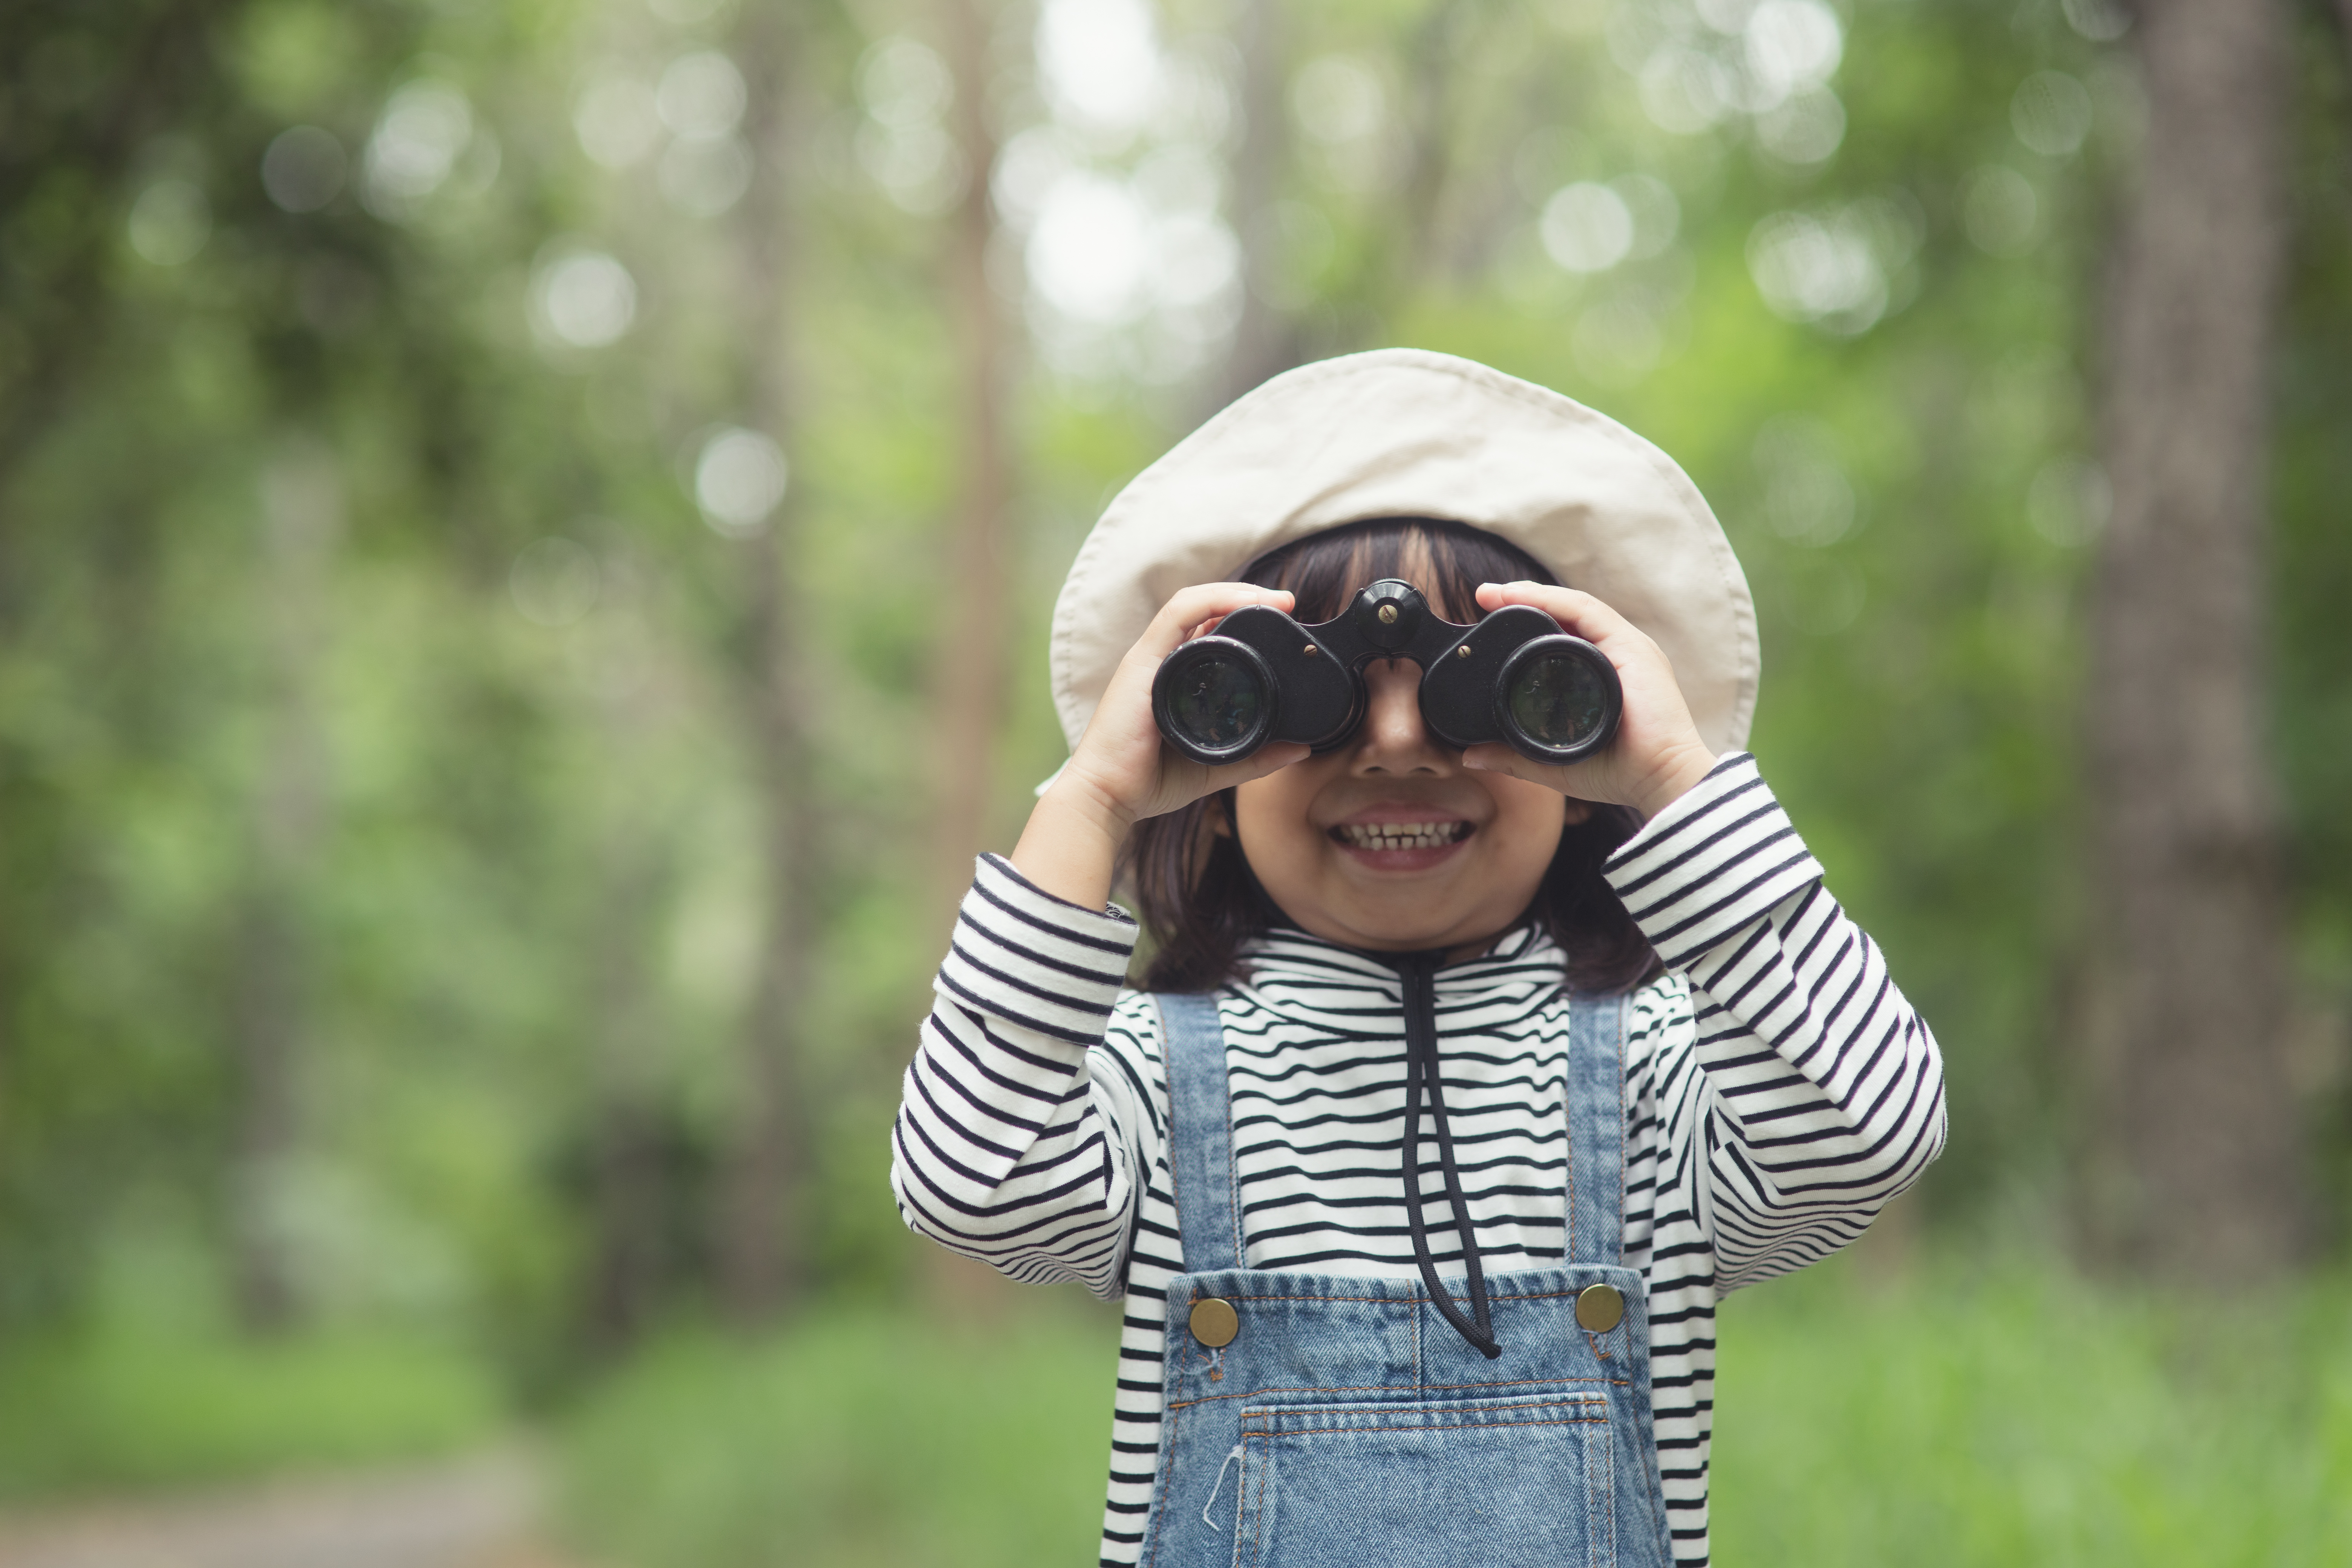 Happy kid looking ahead. Smiling child with the binoculars. Travel and adventure concept.